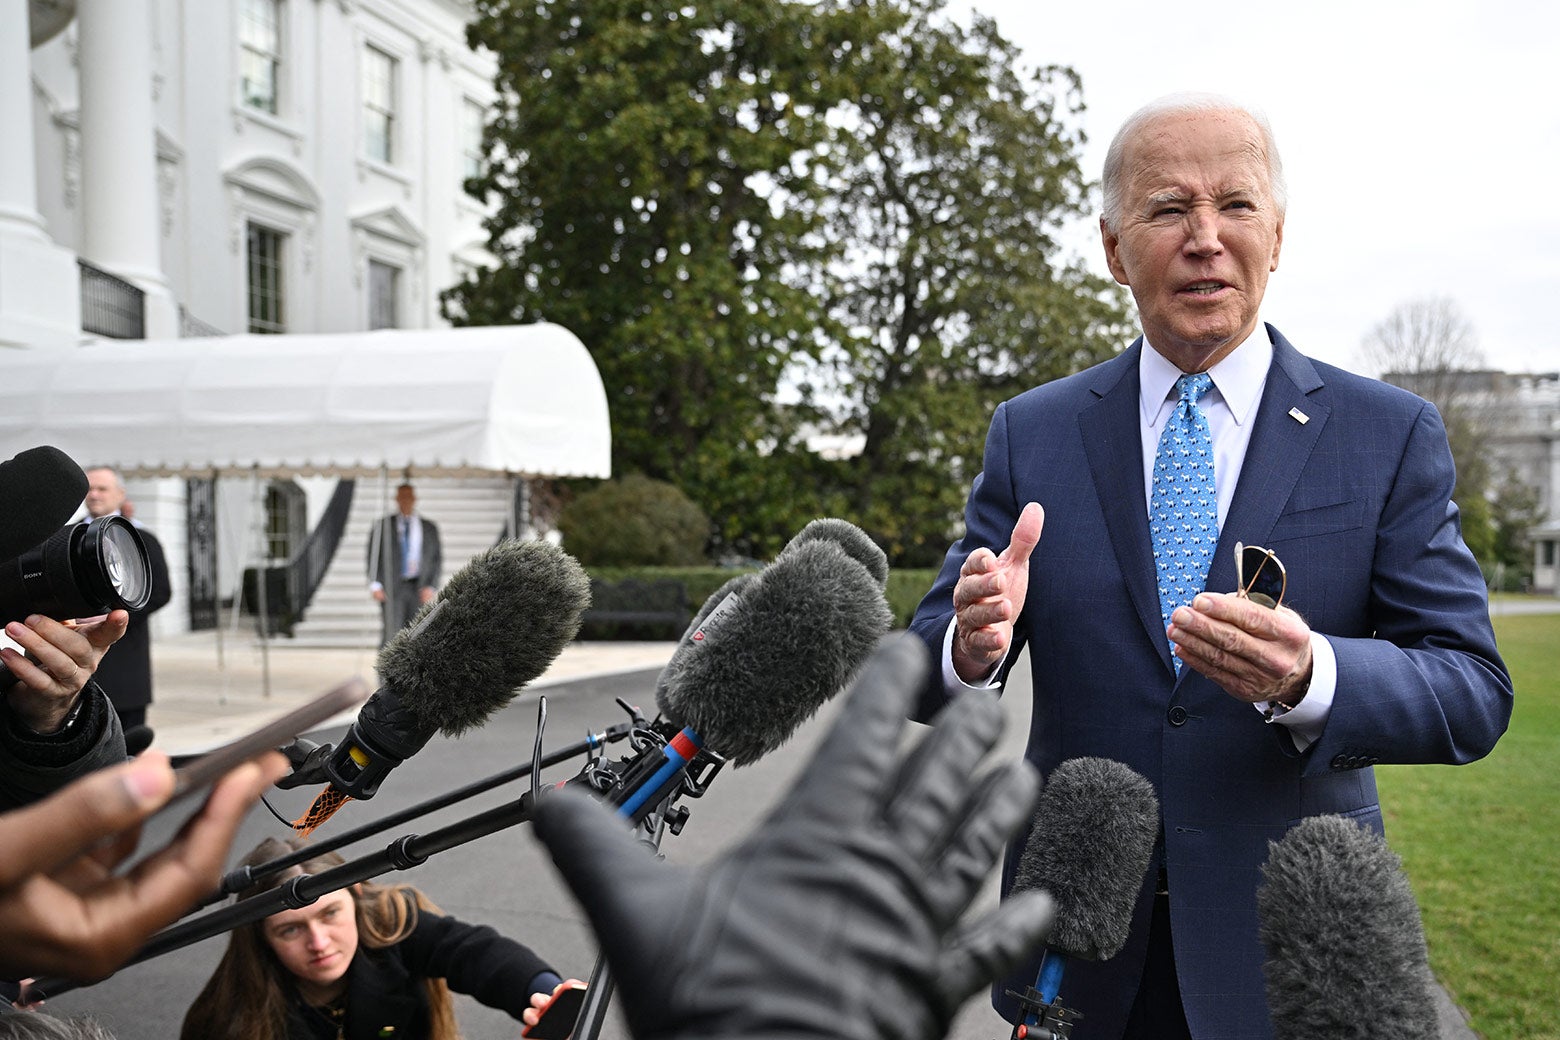 Biden Is Walking a Tightrope After Iran-Backed Forces Killed U.S. Soldiers. Here Are Some of His Options.